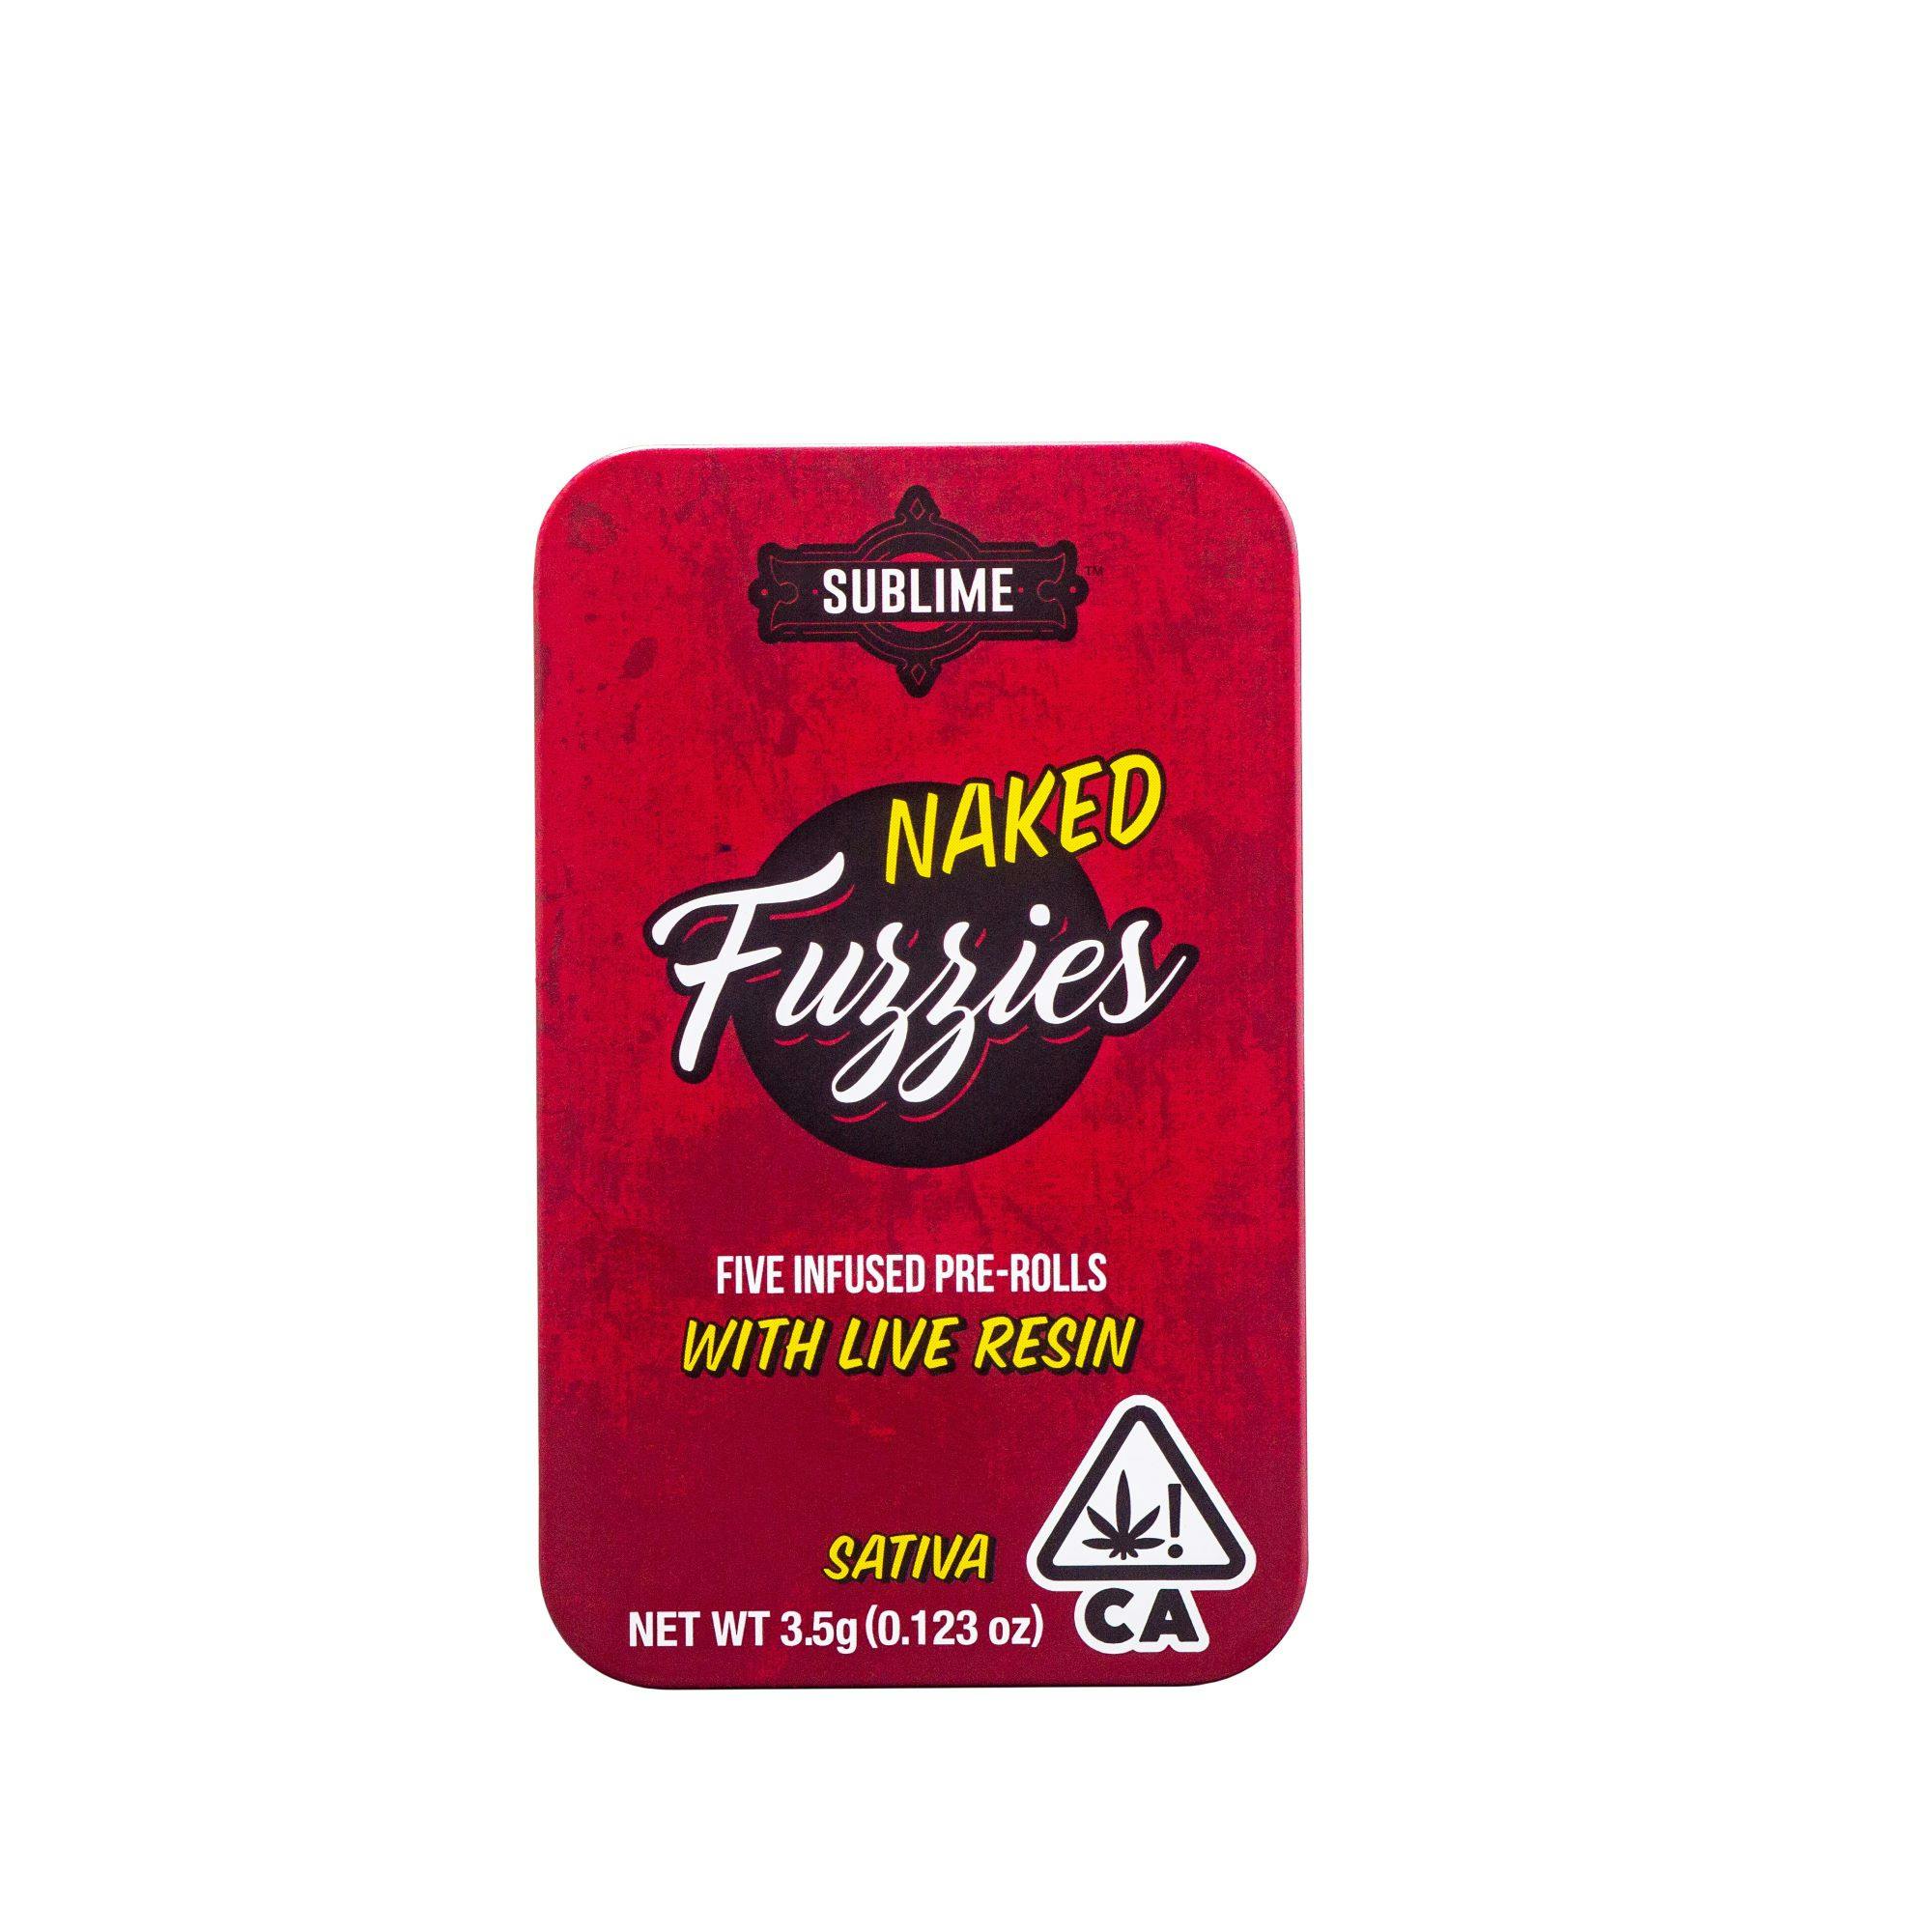 Naked Fuzzies with Live Resin - Sativa - 5pk [3.5g] - 22%+ THC